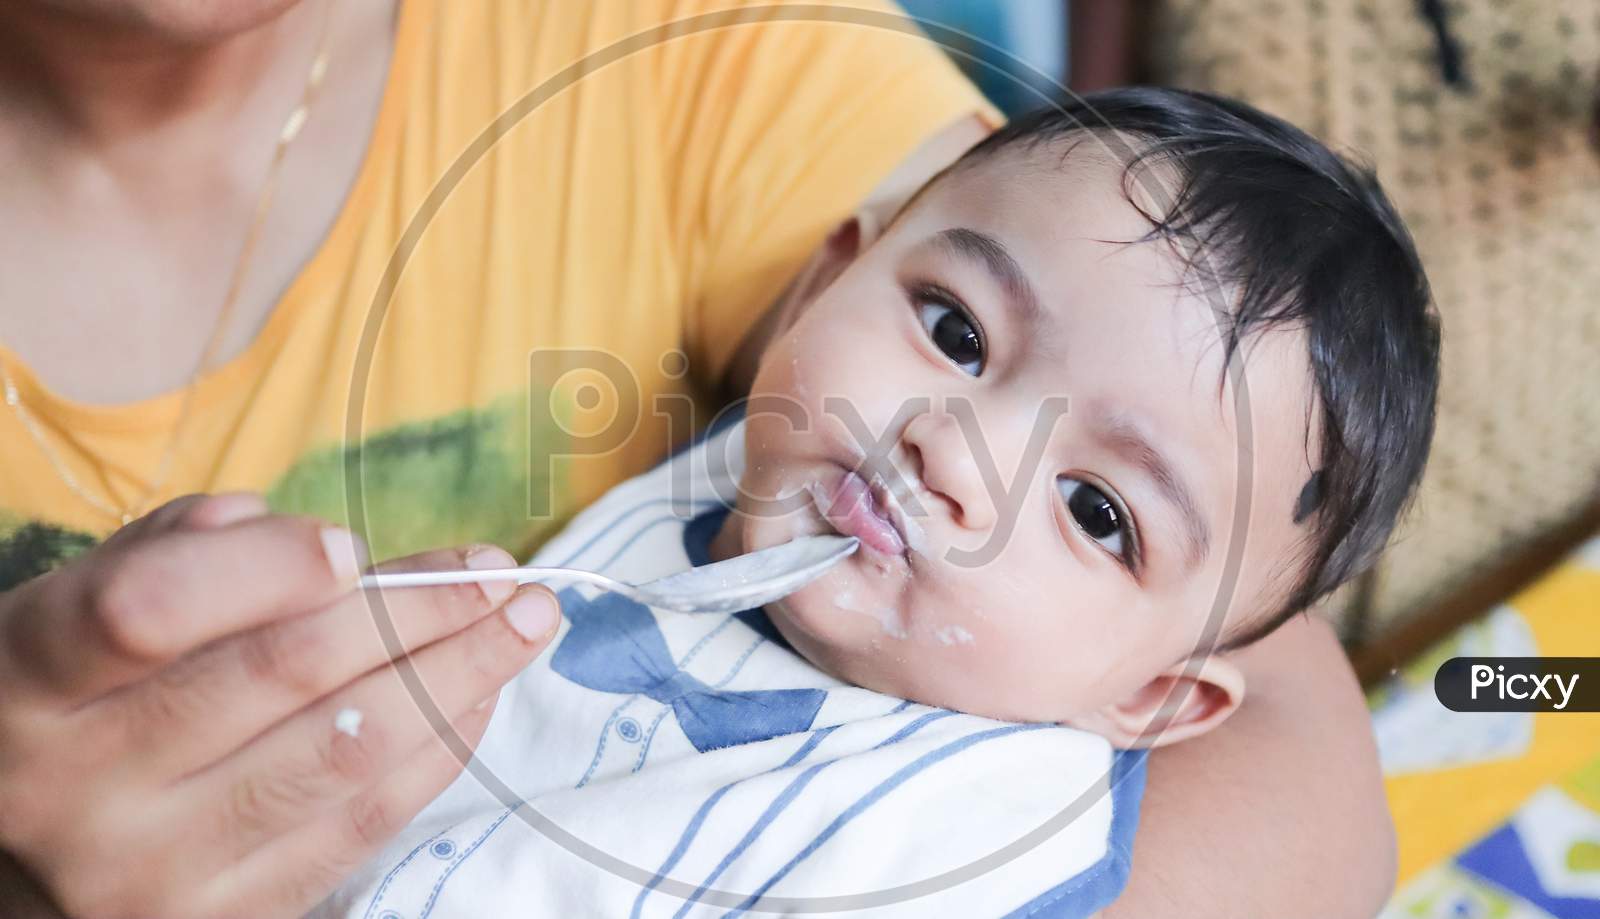 An Infant Toddler Baby Boy After Weaning Eating Solid Food With Spoon